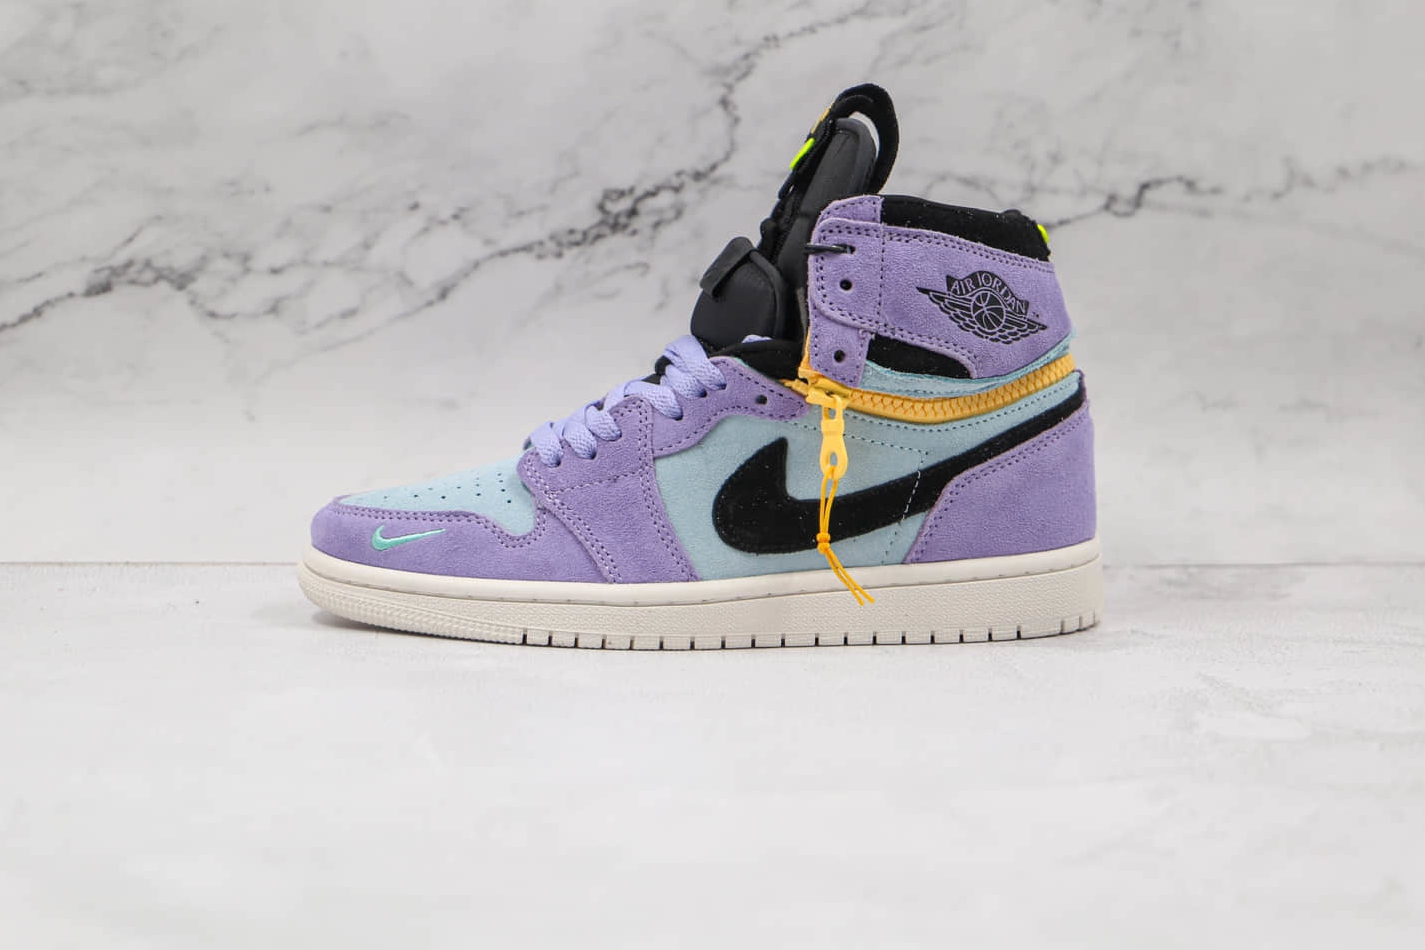 Air Jordan 1 High Switch Purple Pulse CW6576-500 - Latest Release at Affordable Prices